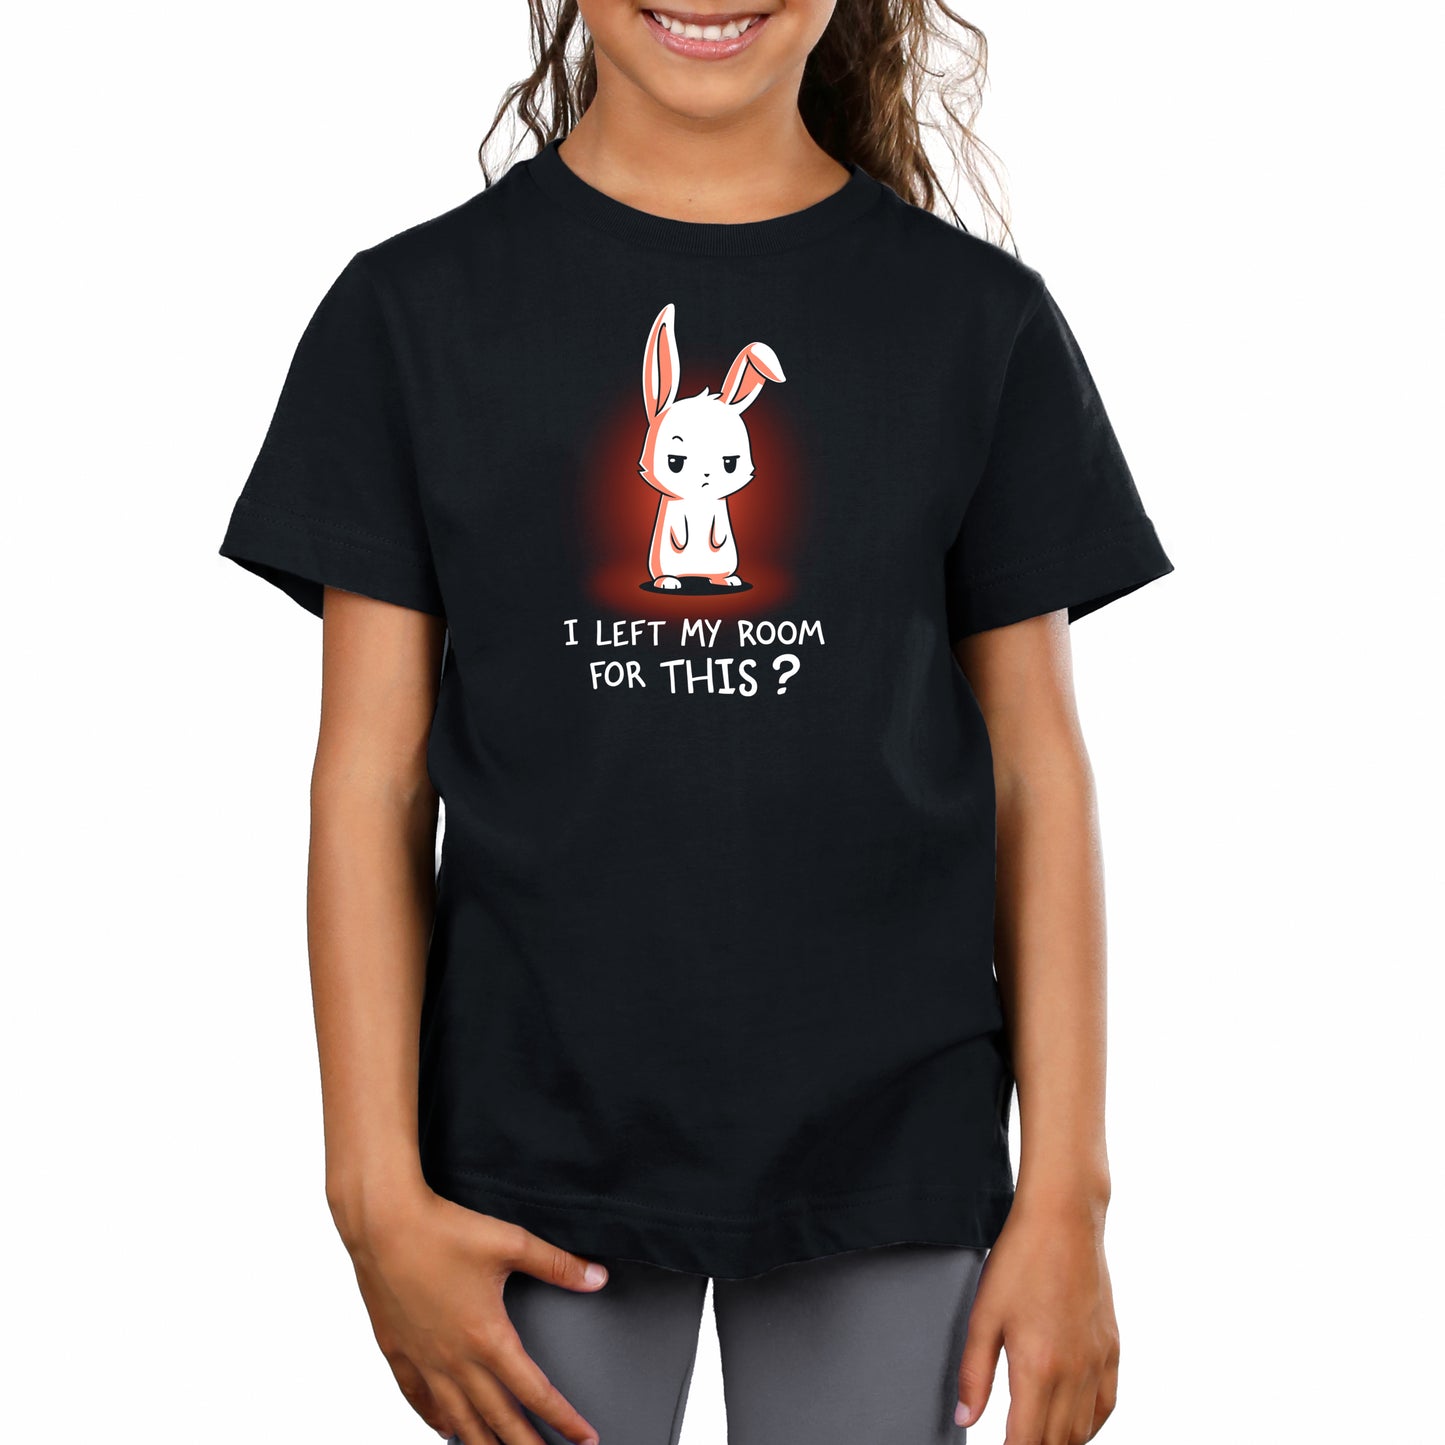 A child wearing a super soft cotton, black t-shirt with an illustration of a white rabbit and the text "I LEFT MY ROOM FOR THIS?" from monsterdigital's I Left My Room For This? collection.